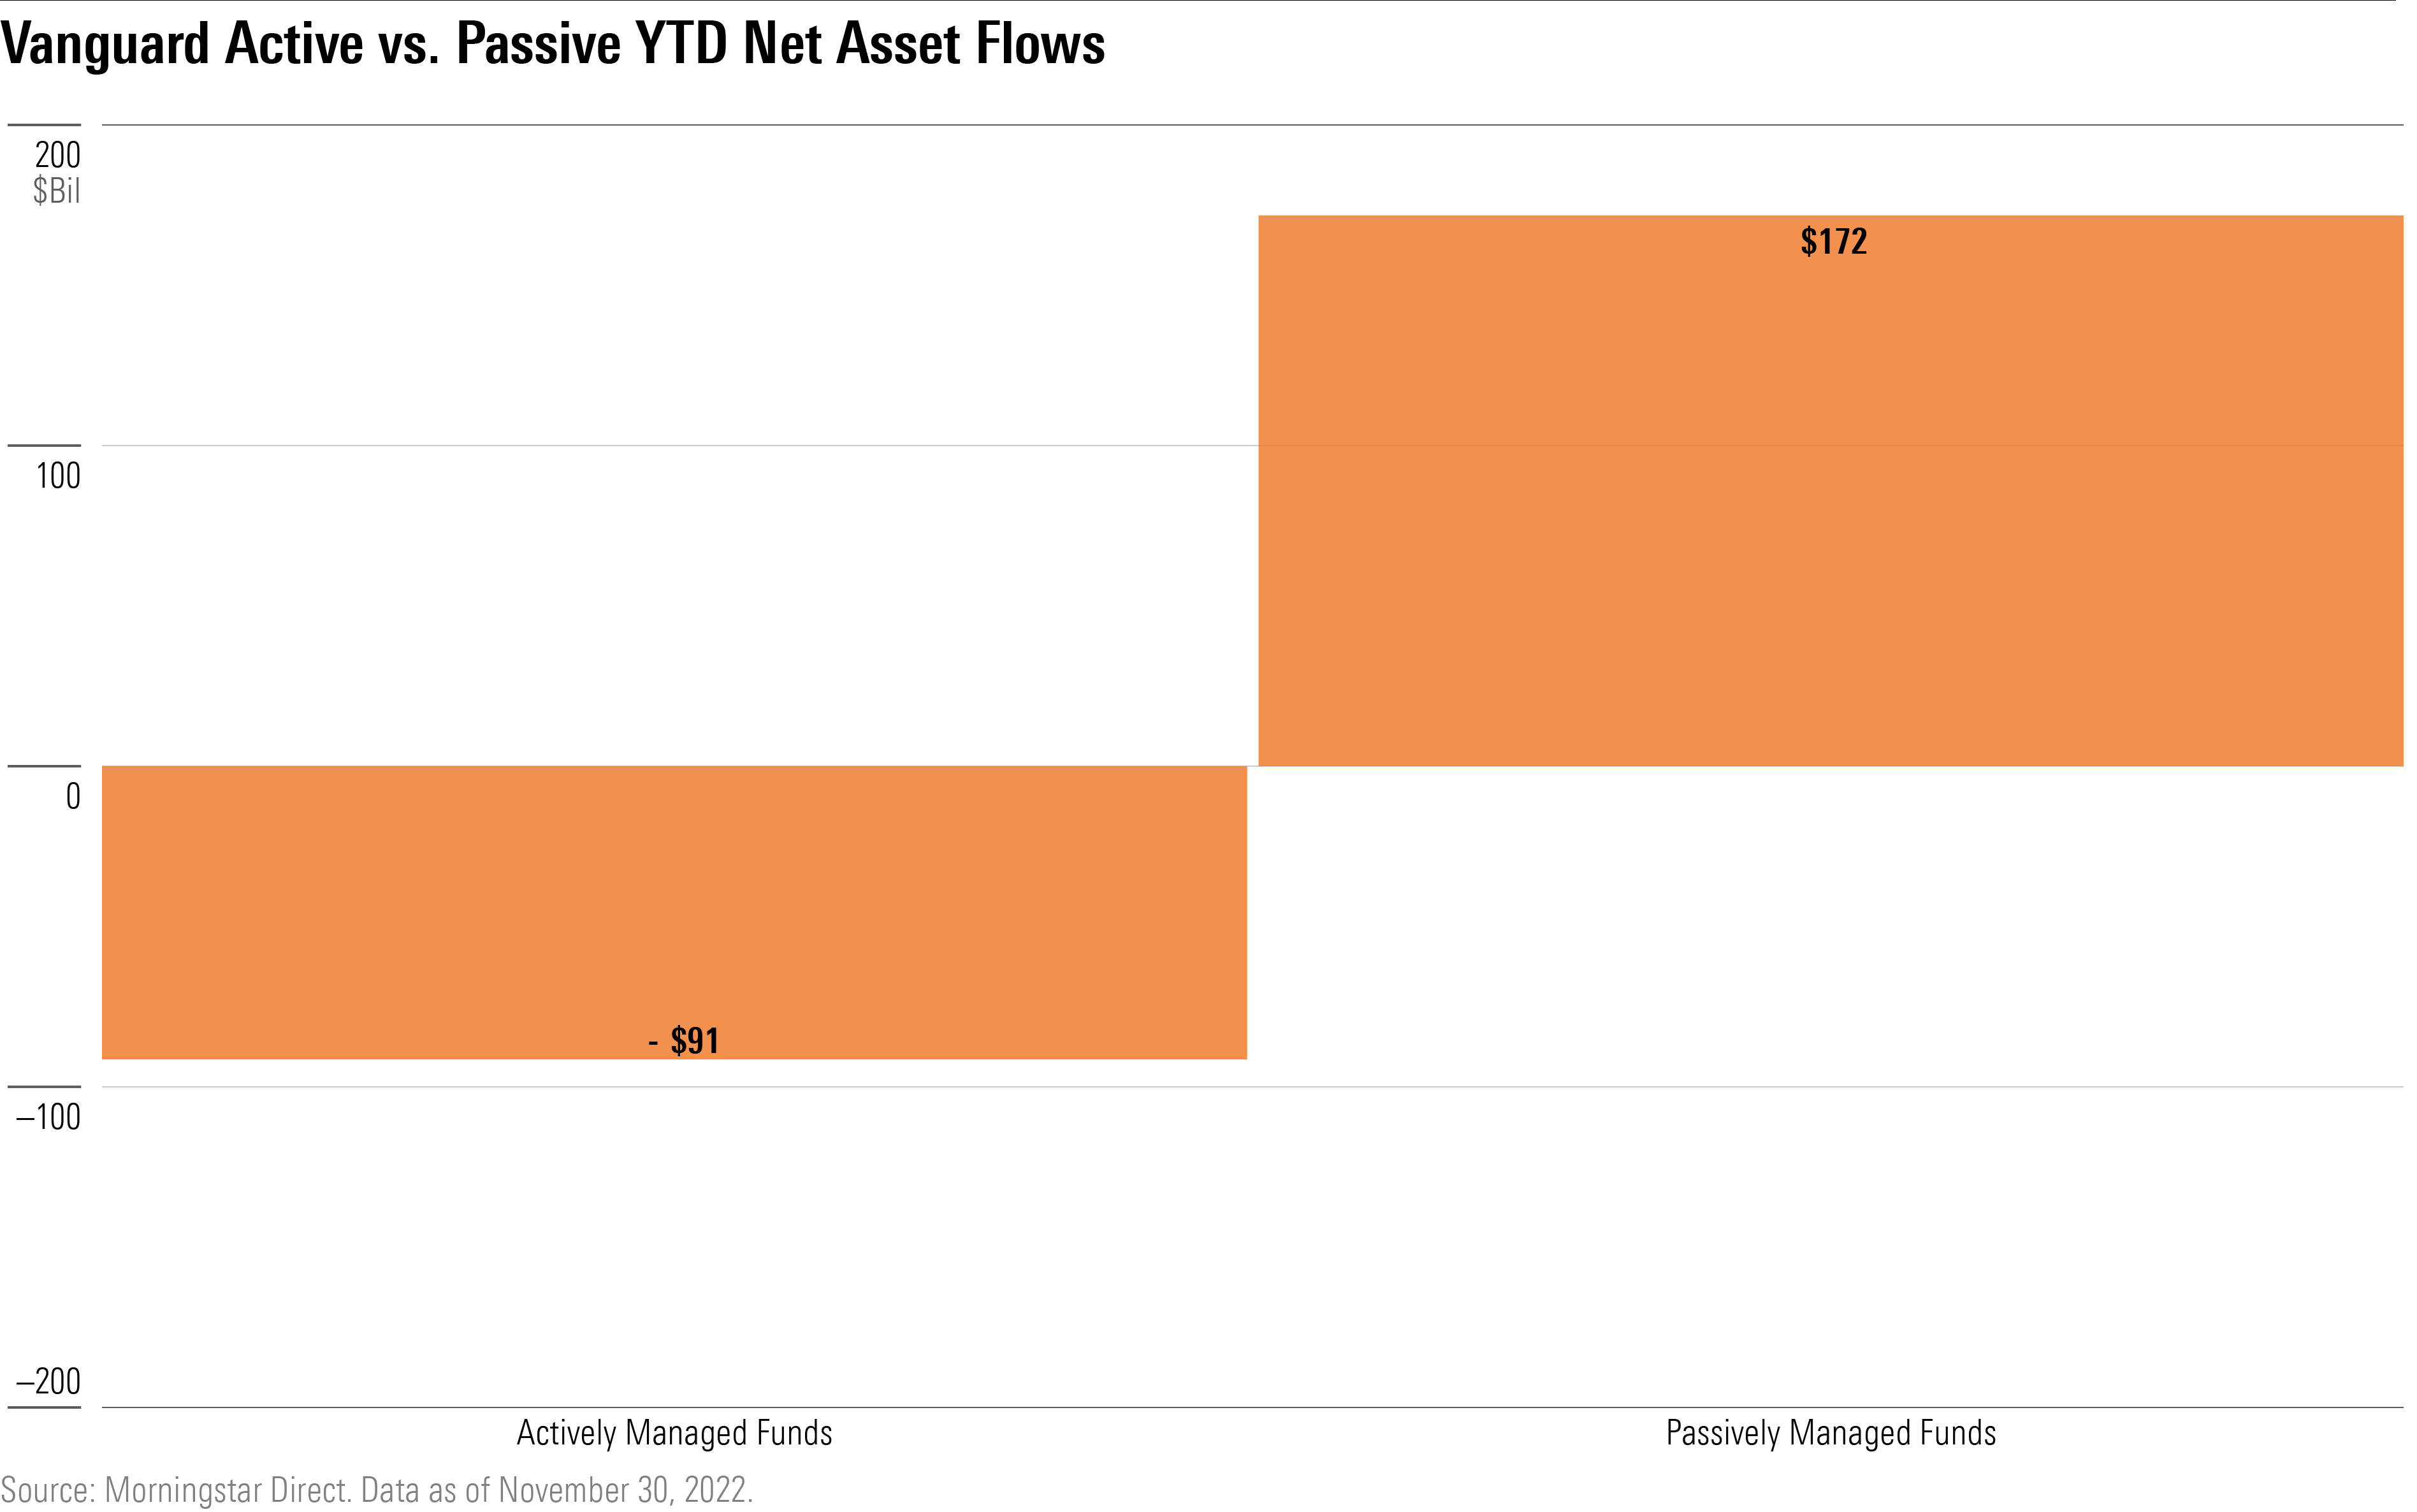 Bar chart showing active and passive flows to Vanguard mutual funds and exchange-traded funds